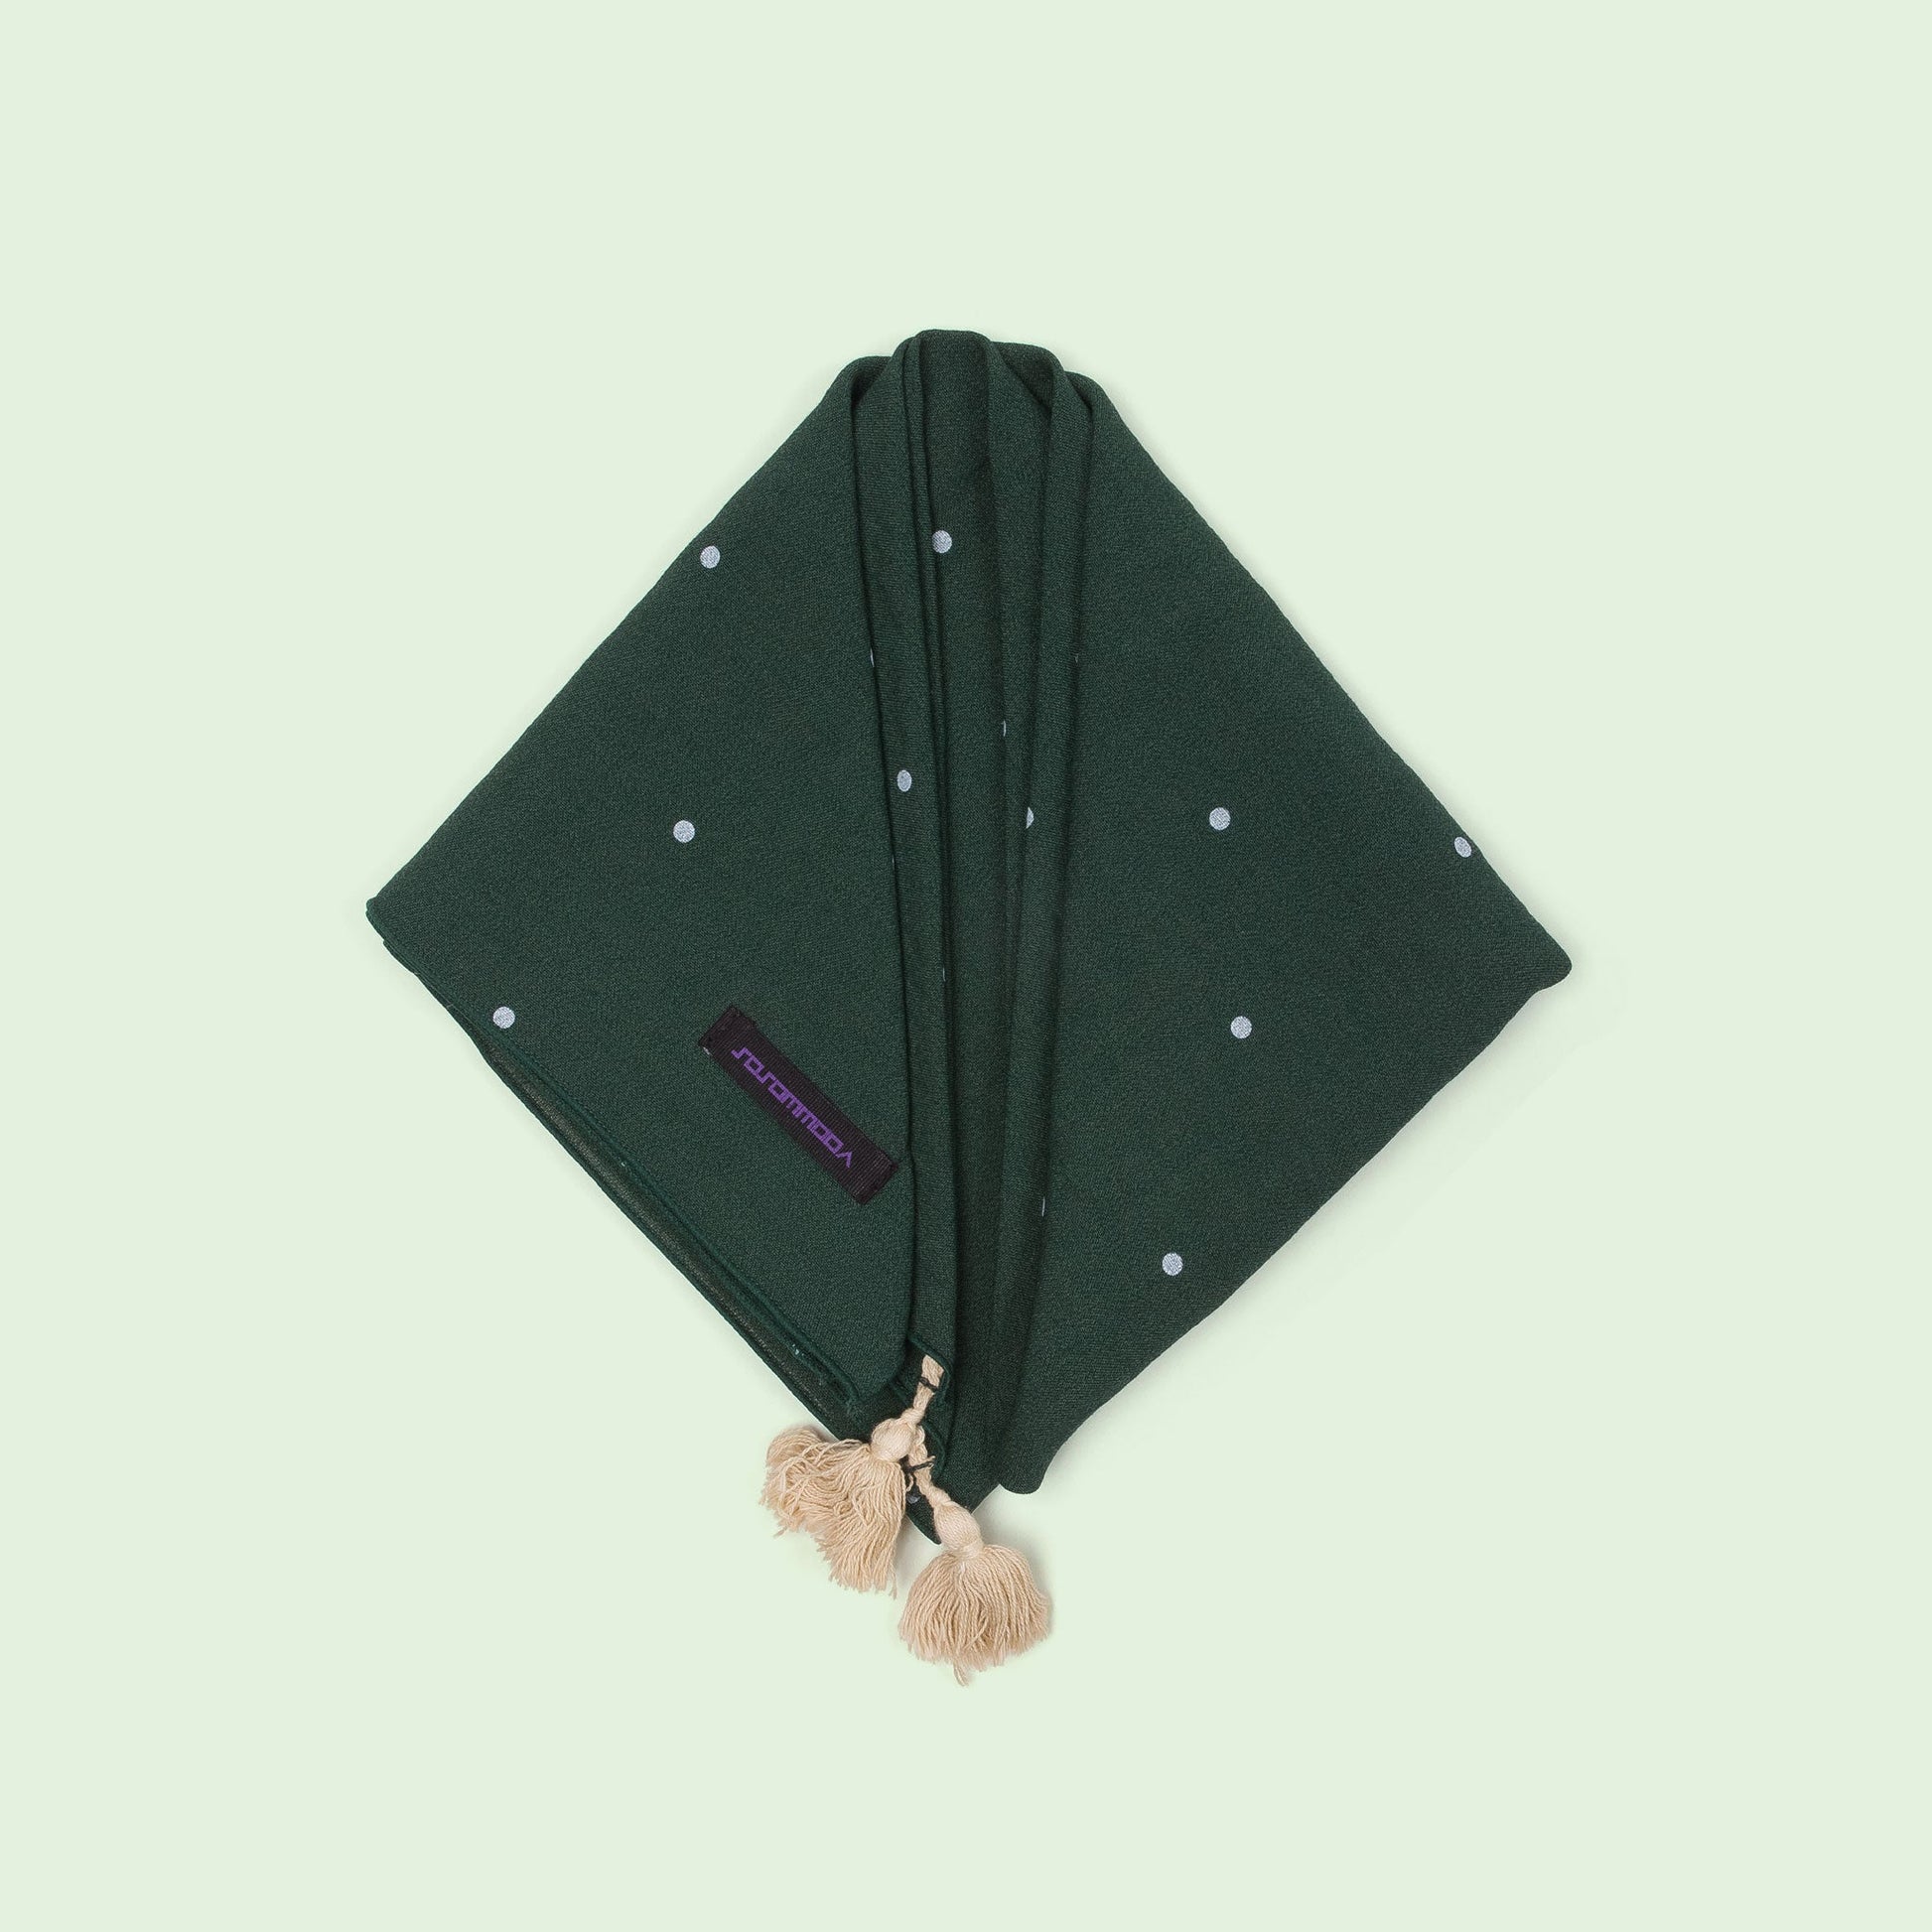 Vogue Dot Square Scarf with Tassels (Forest Green) top view